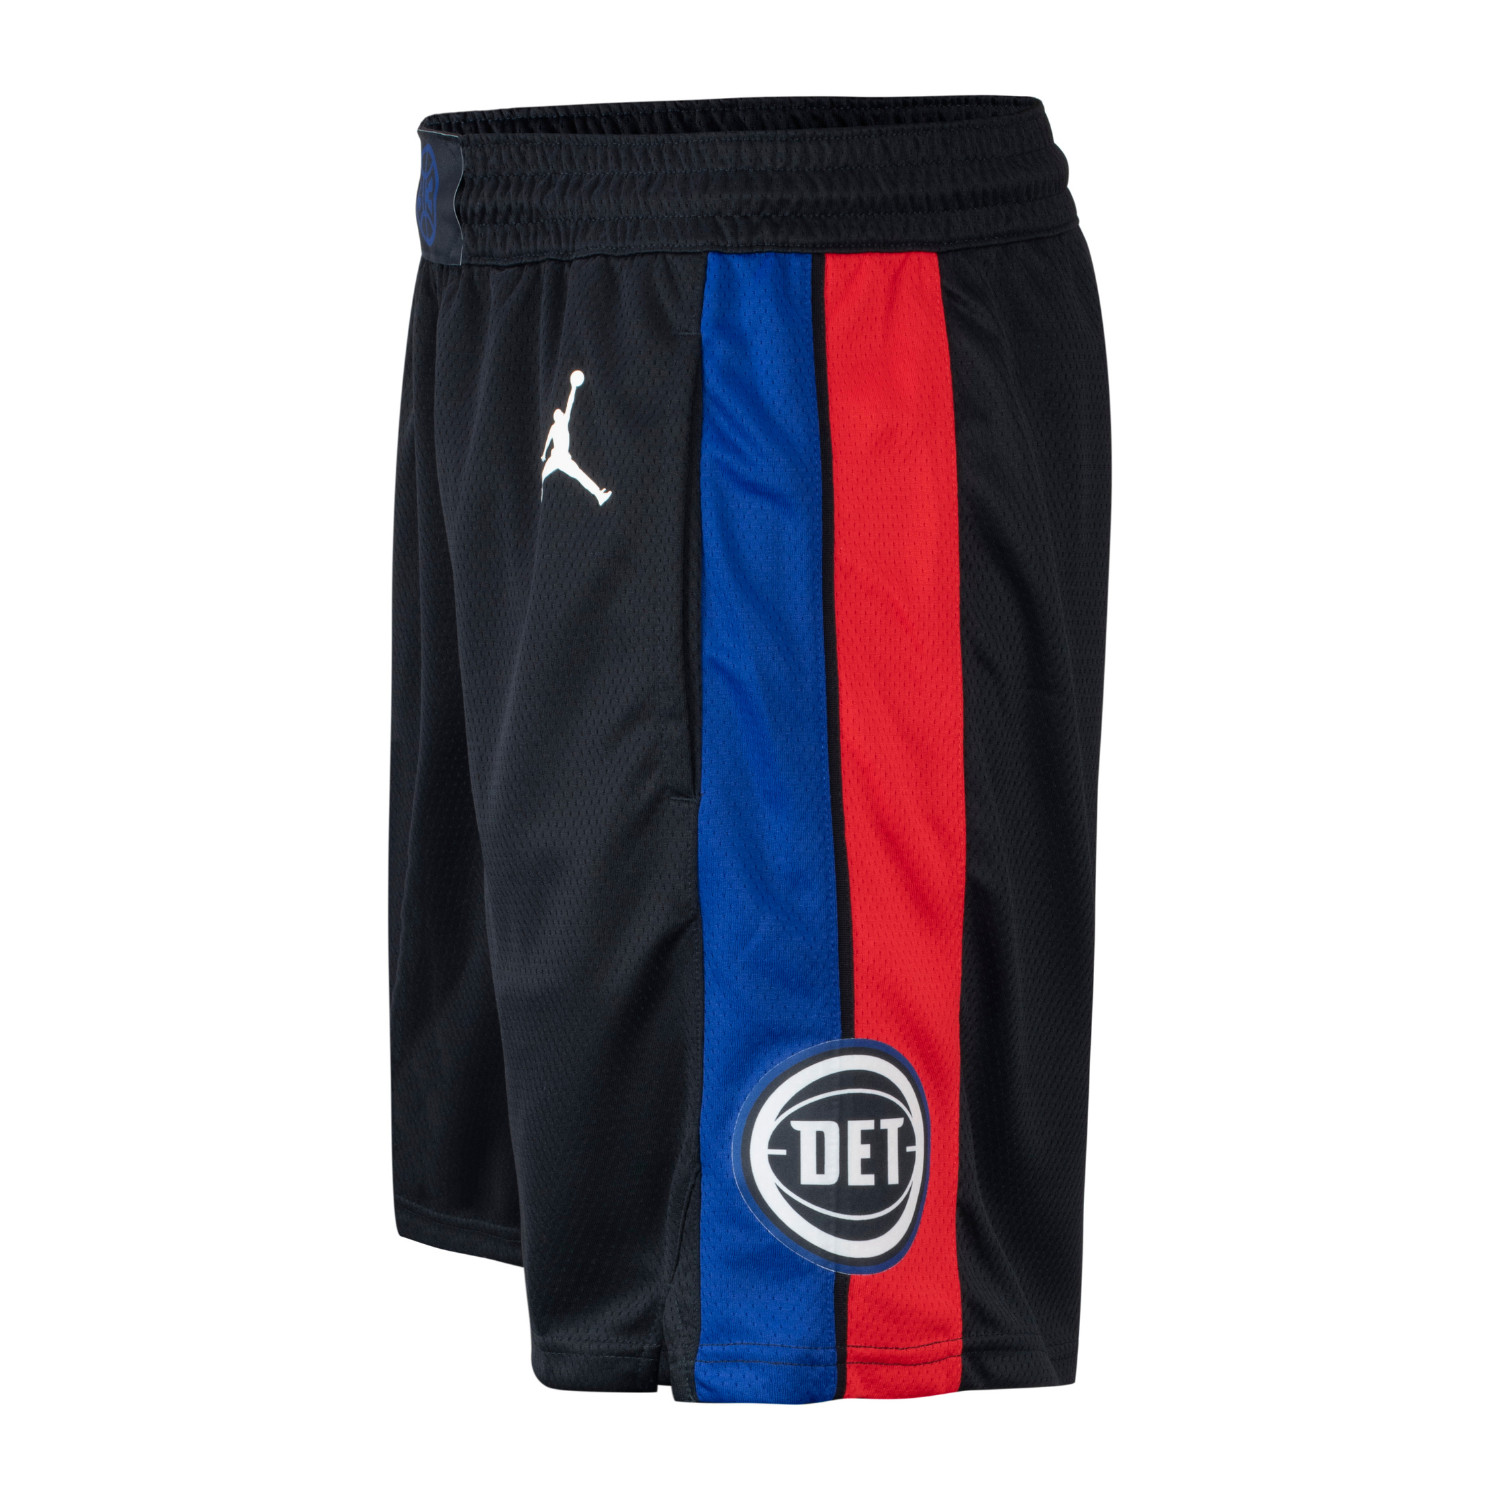 clippers shorts